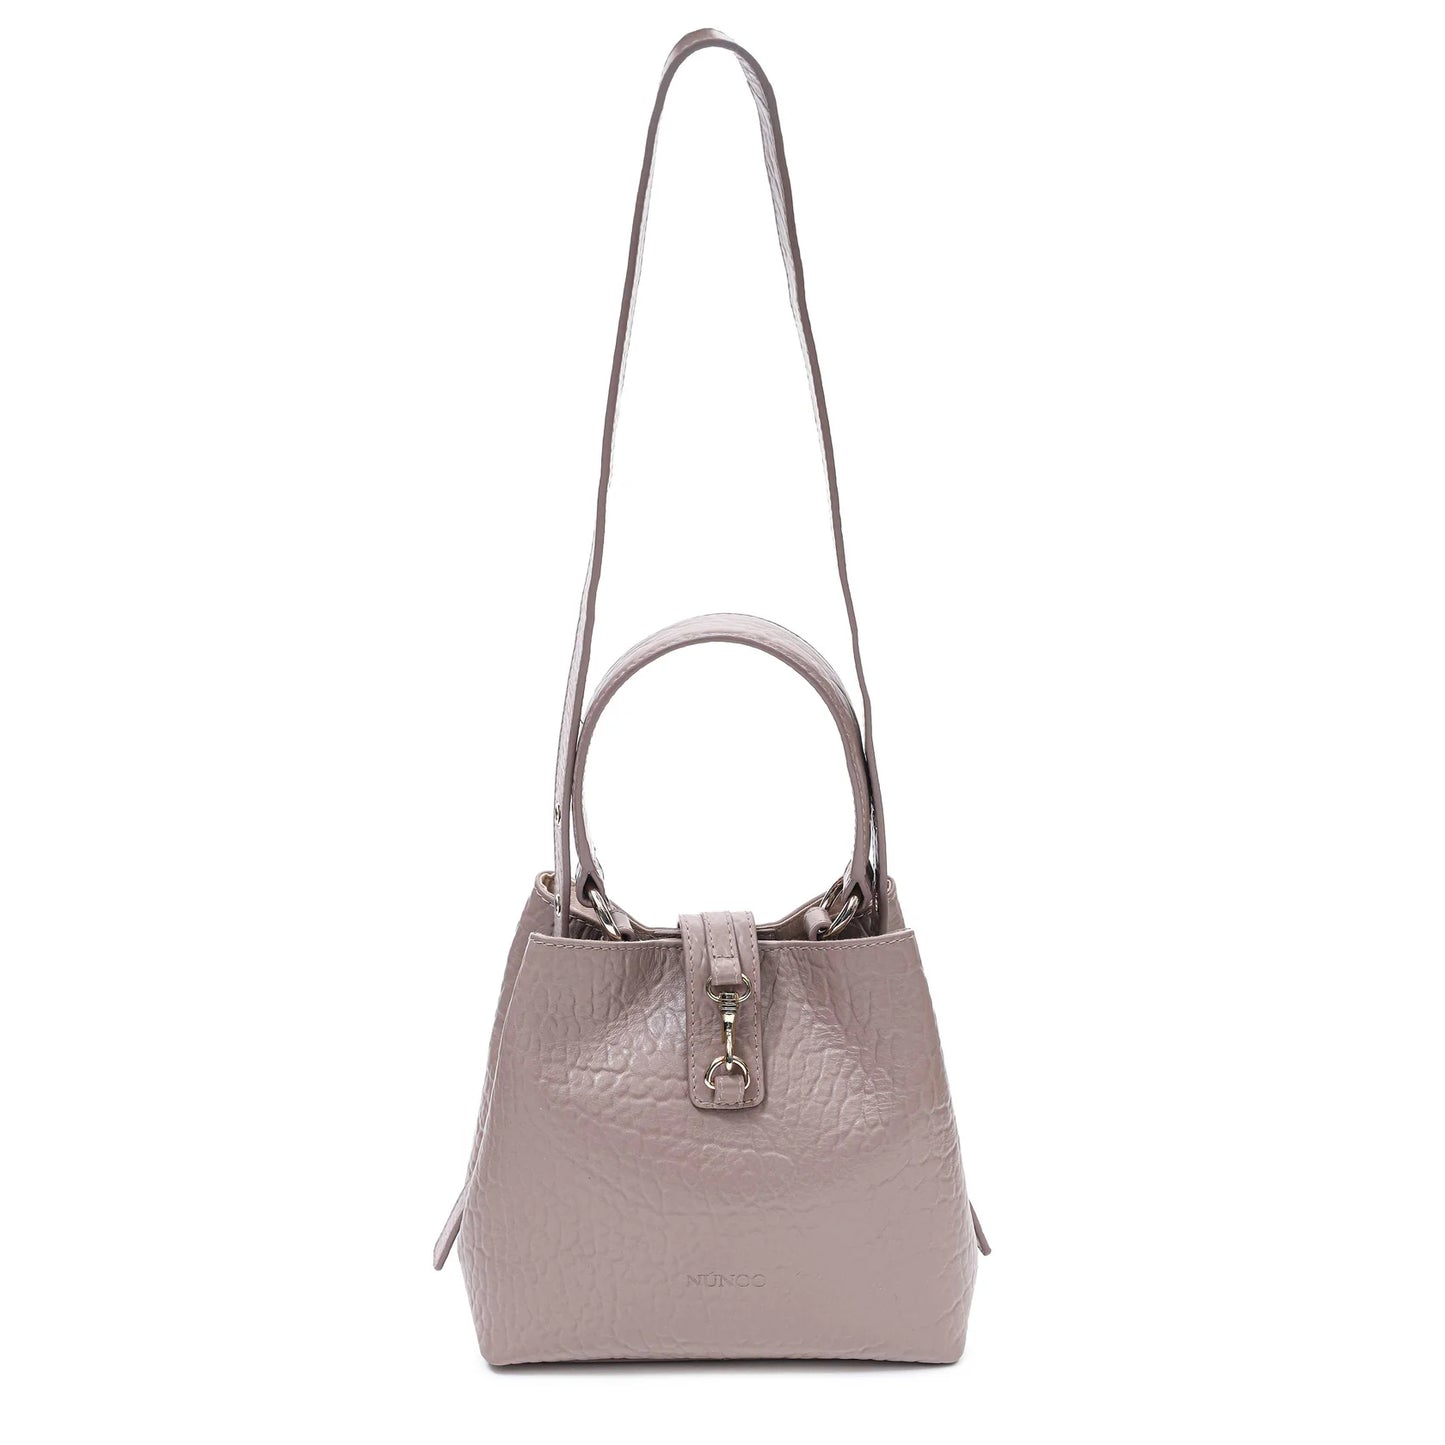 NUNOO | SHOULDER BAGS MUJER | SMALL CHIARA NEW ZEALAND TAUPE W. GOLD | GRIS